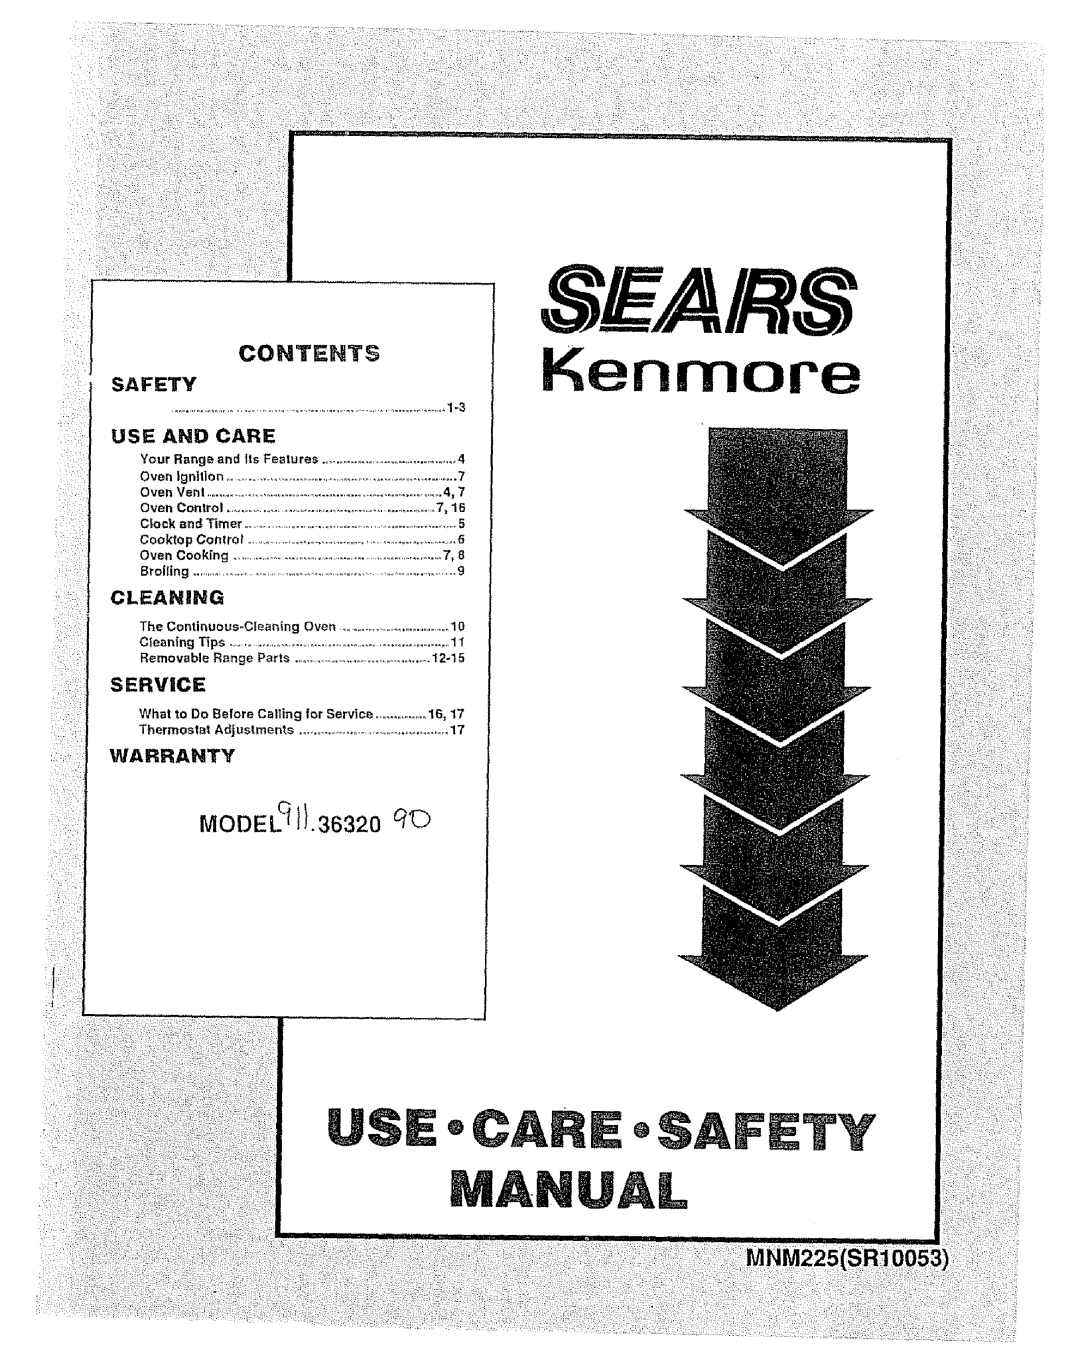 Sears 911.363209 warranty Contents, MODEL91.36320, Service, Kenmore, Cleaning, Removable Range, 12-15, What to Do Before 